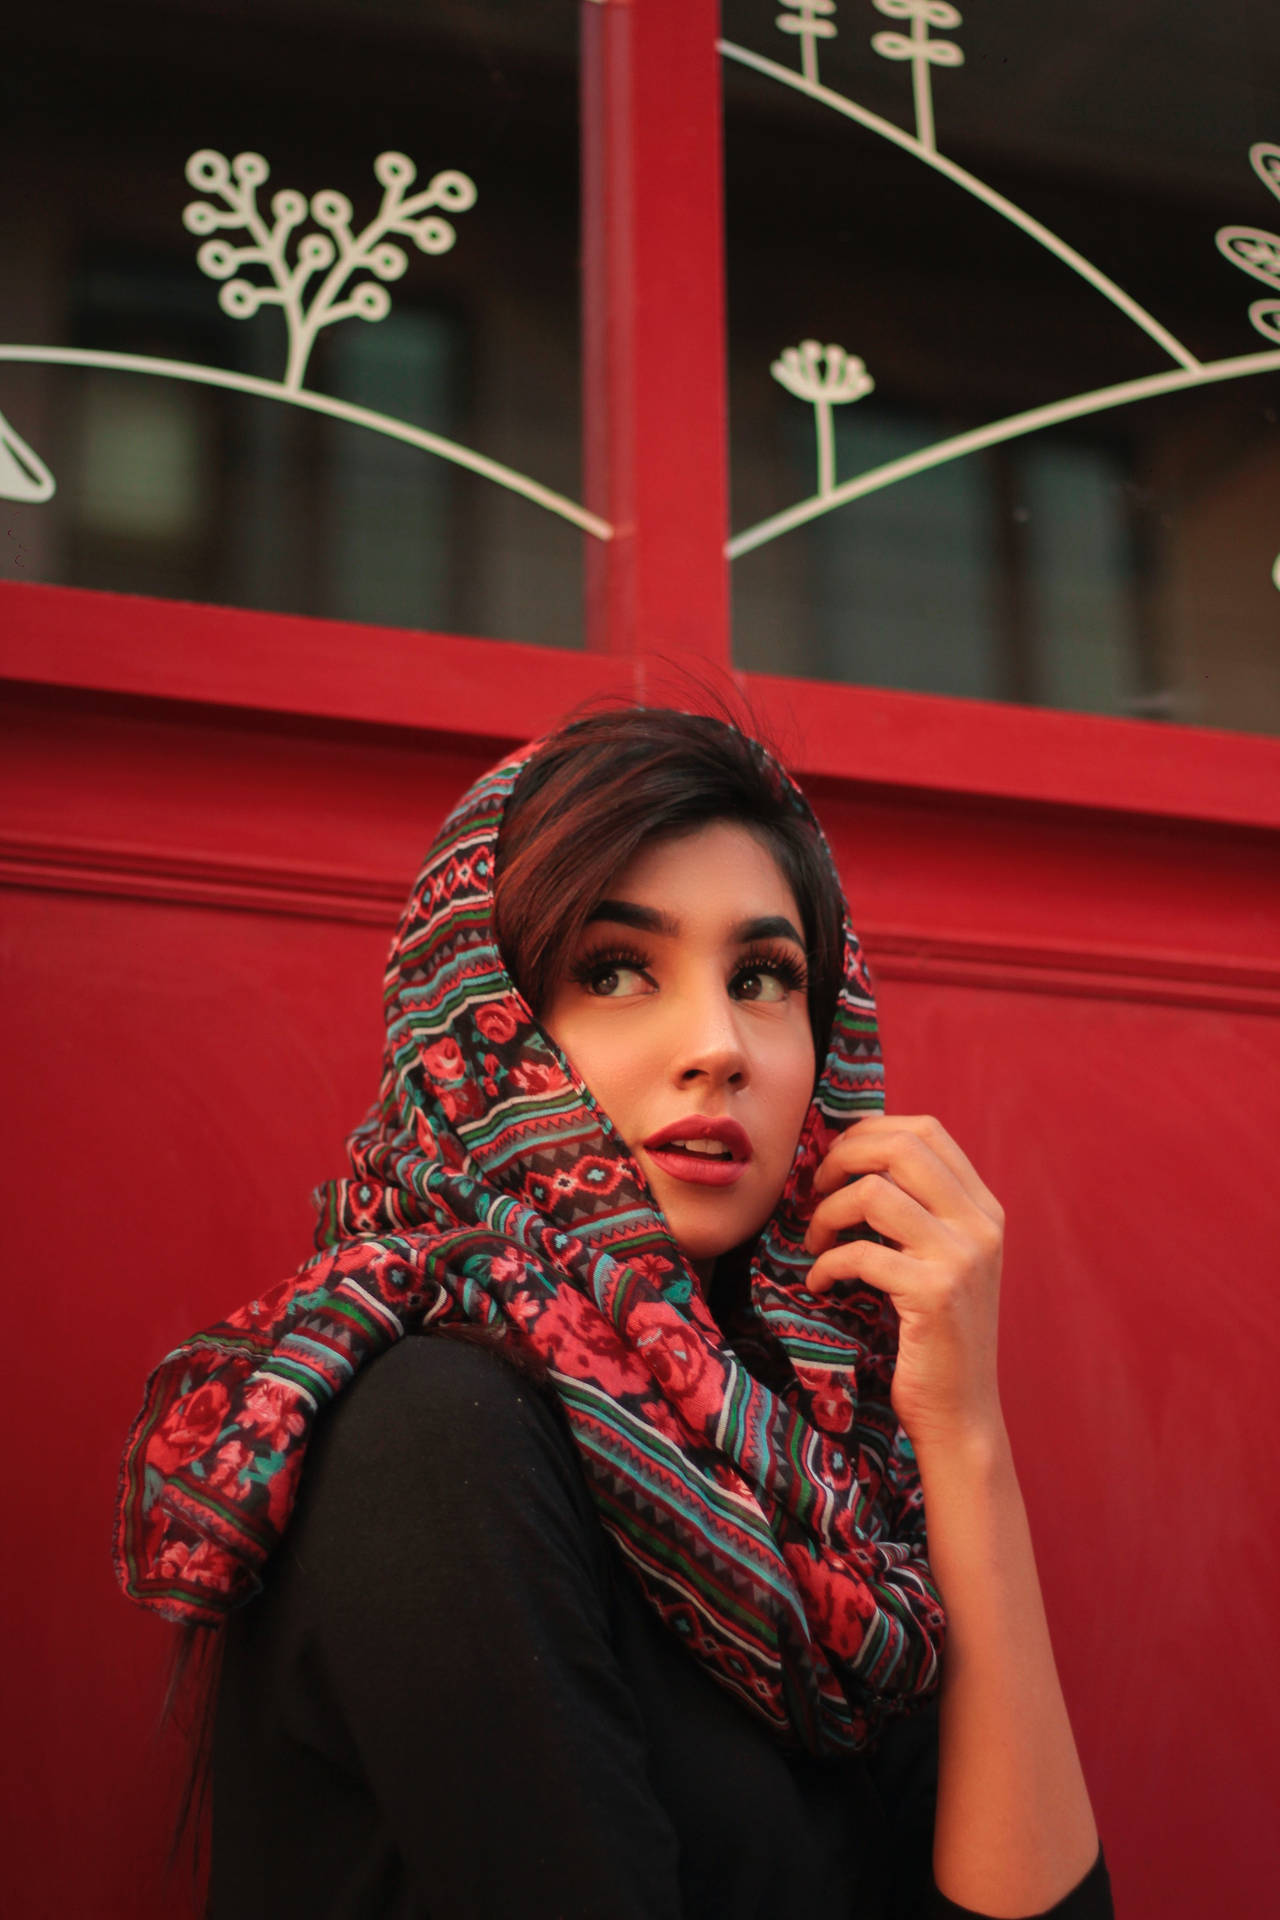 Asian Woman With A Floral Scarf